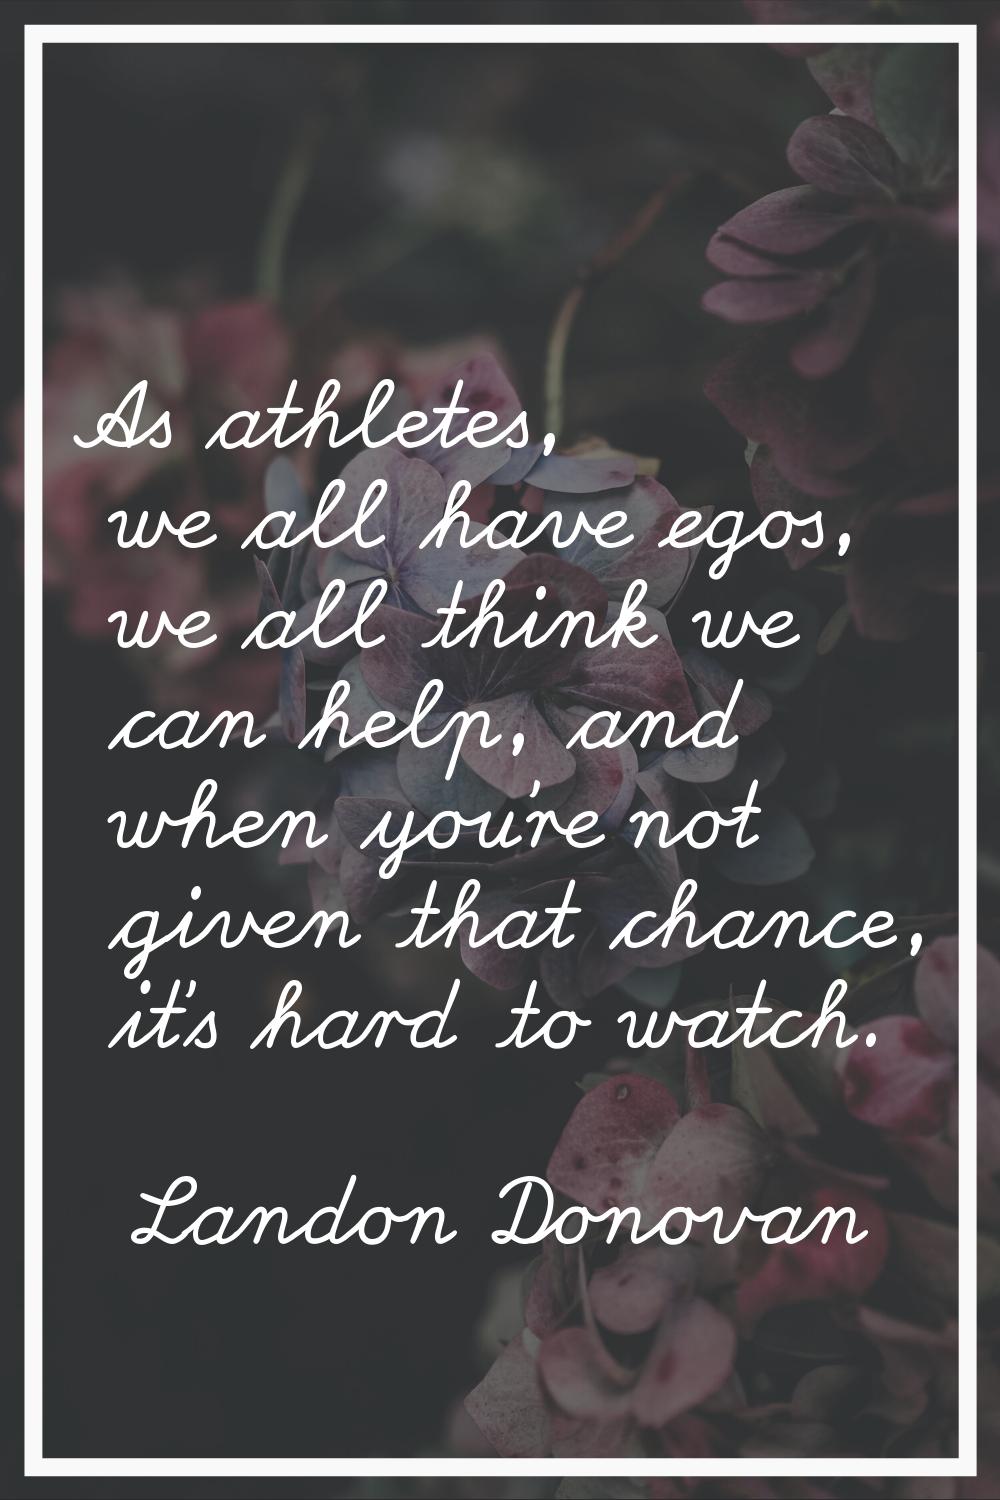 As athletes, we all have egos, we all think we can help, and when you're not given that chance, it'